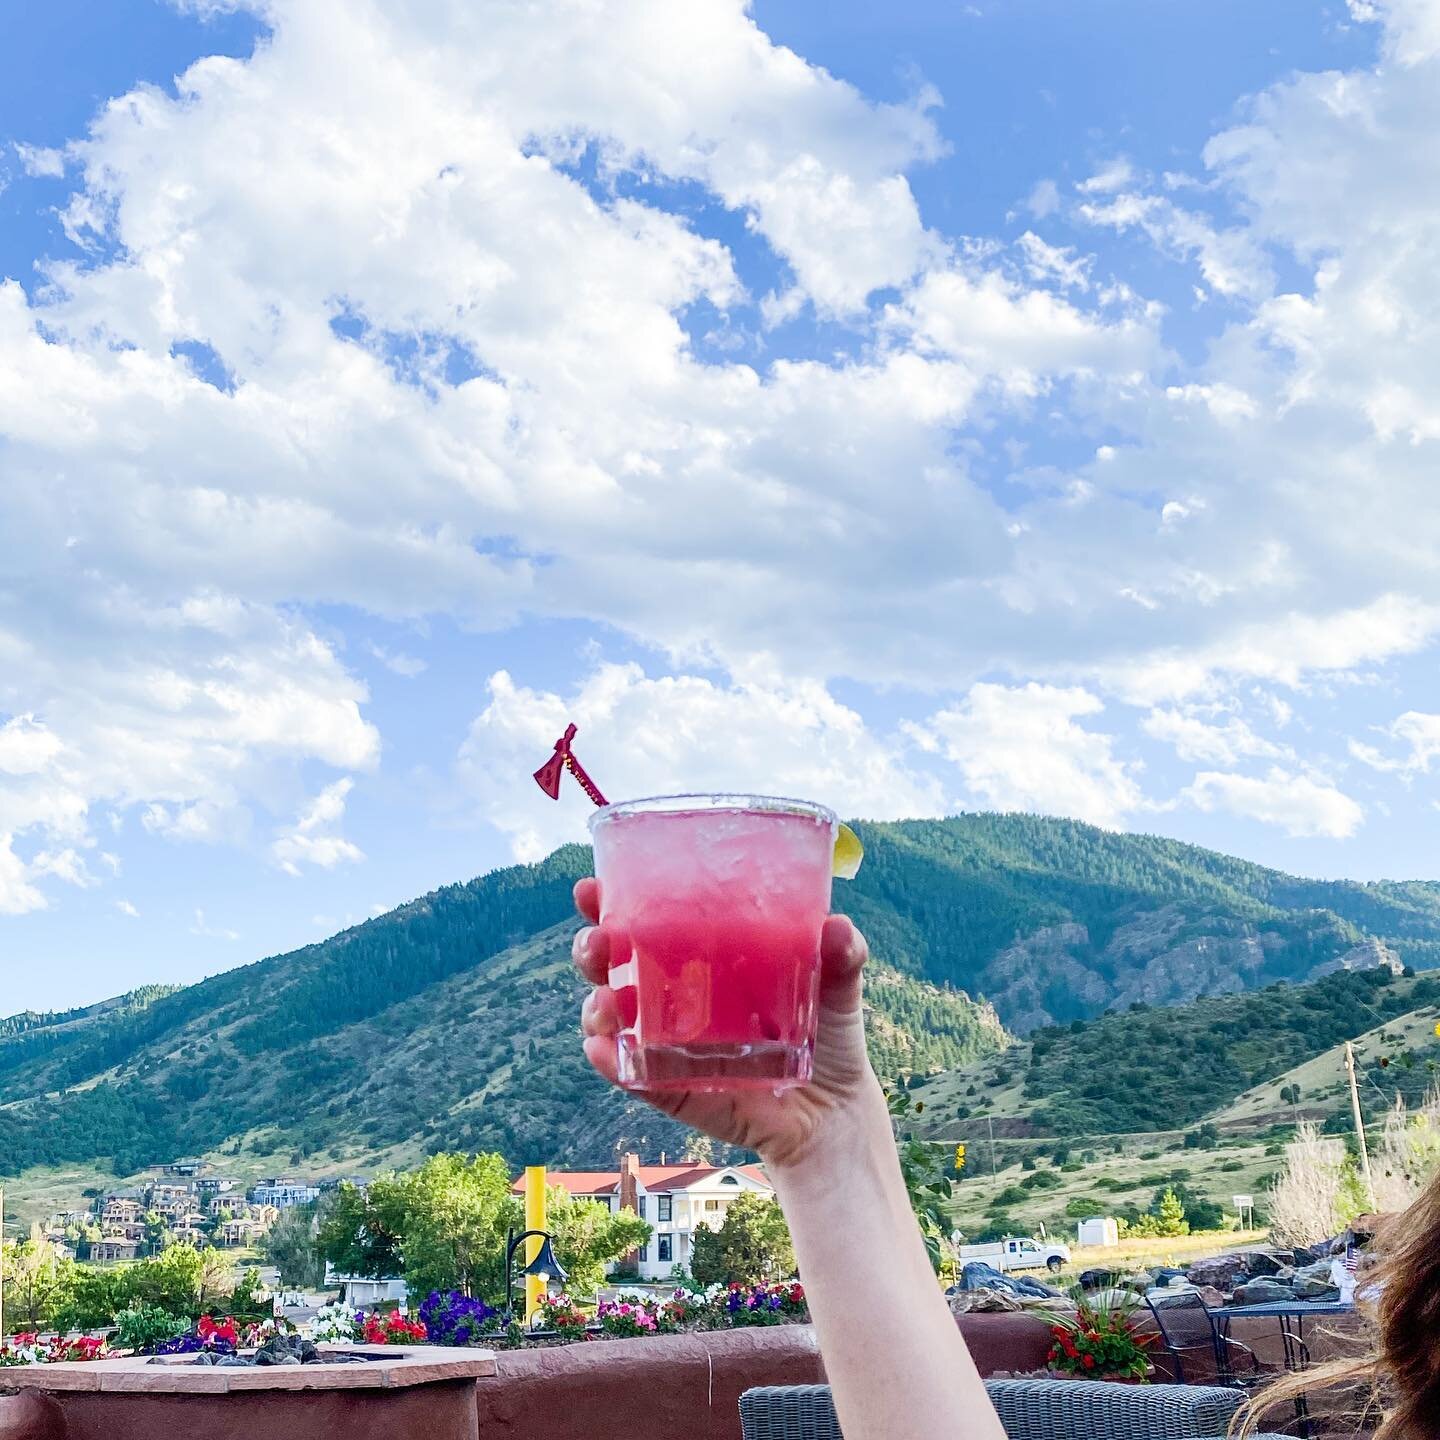 It&rsquo;s Margarita Monday and we&rsquo;re celebrating with @thefortrestaurant&rsquo;s Prickly Pear Margarita! 🍹 We&rsquo;ve always been fans of the Fort, but we are loving their newly redesigned covered patio. It offers cozy fire pits and incredib